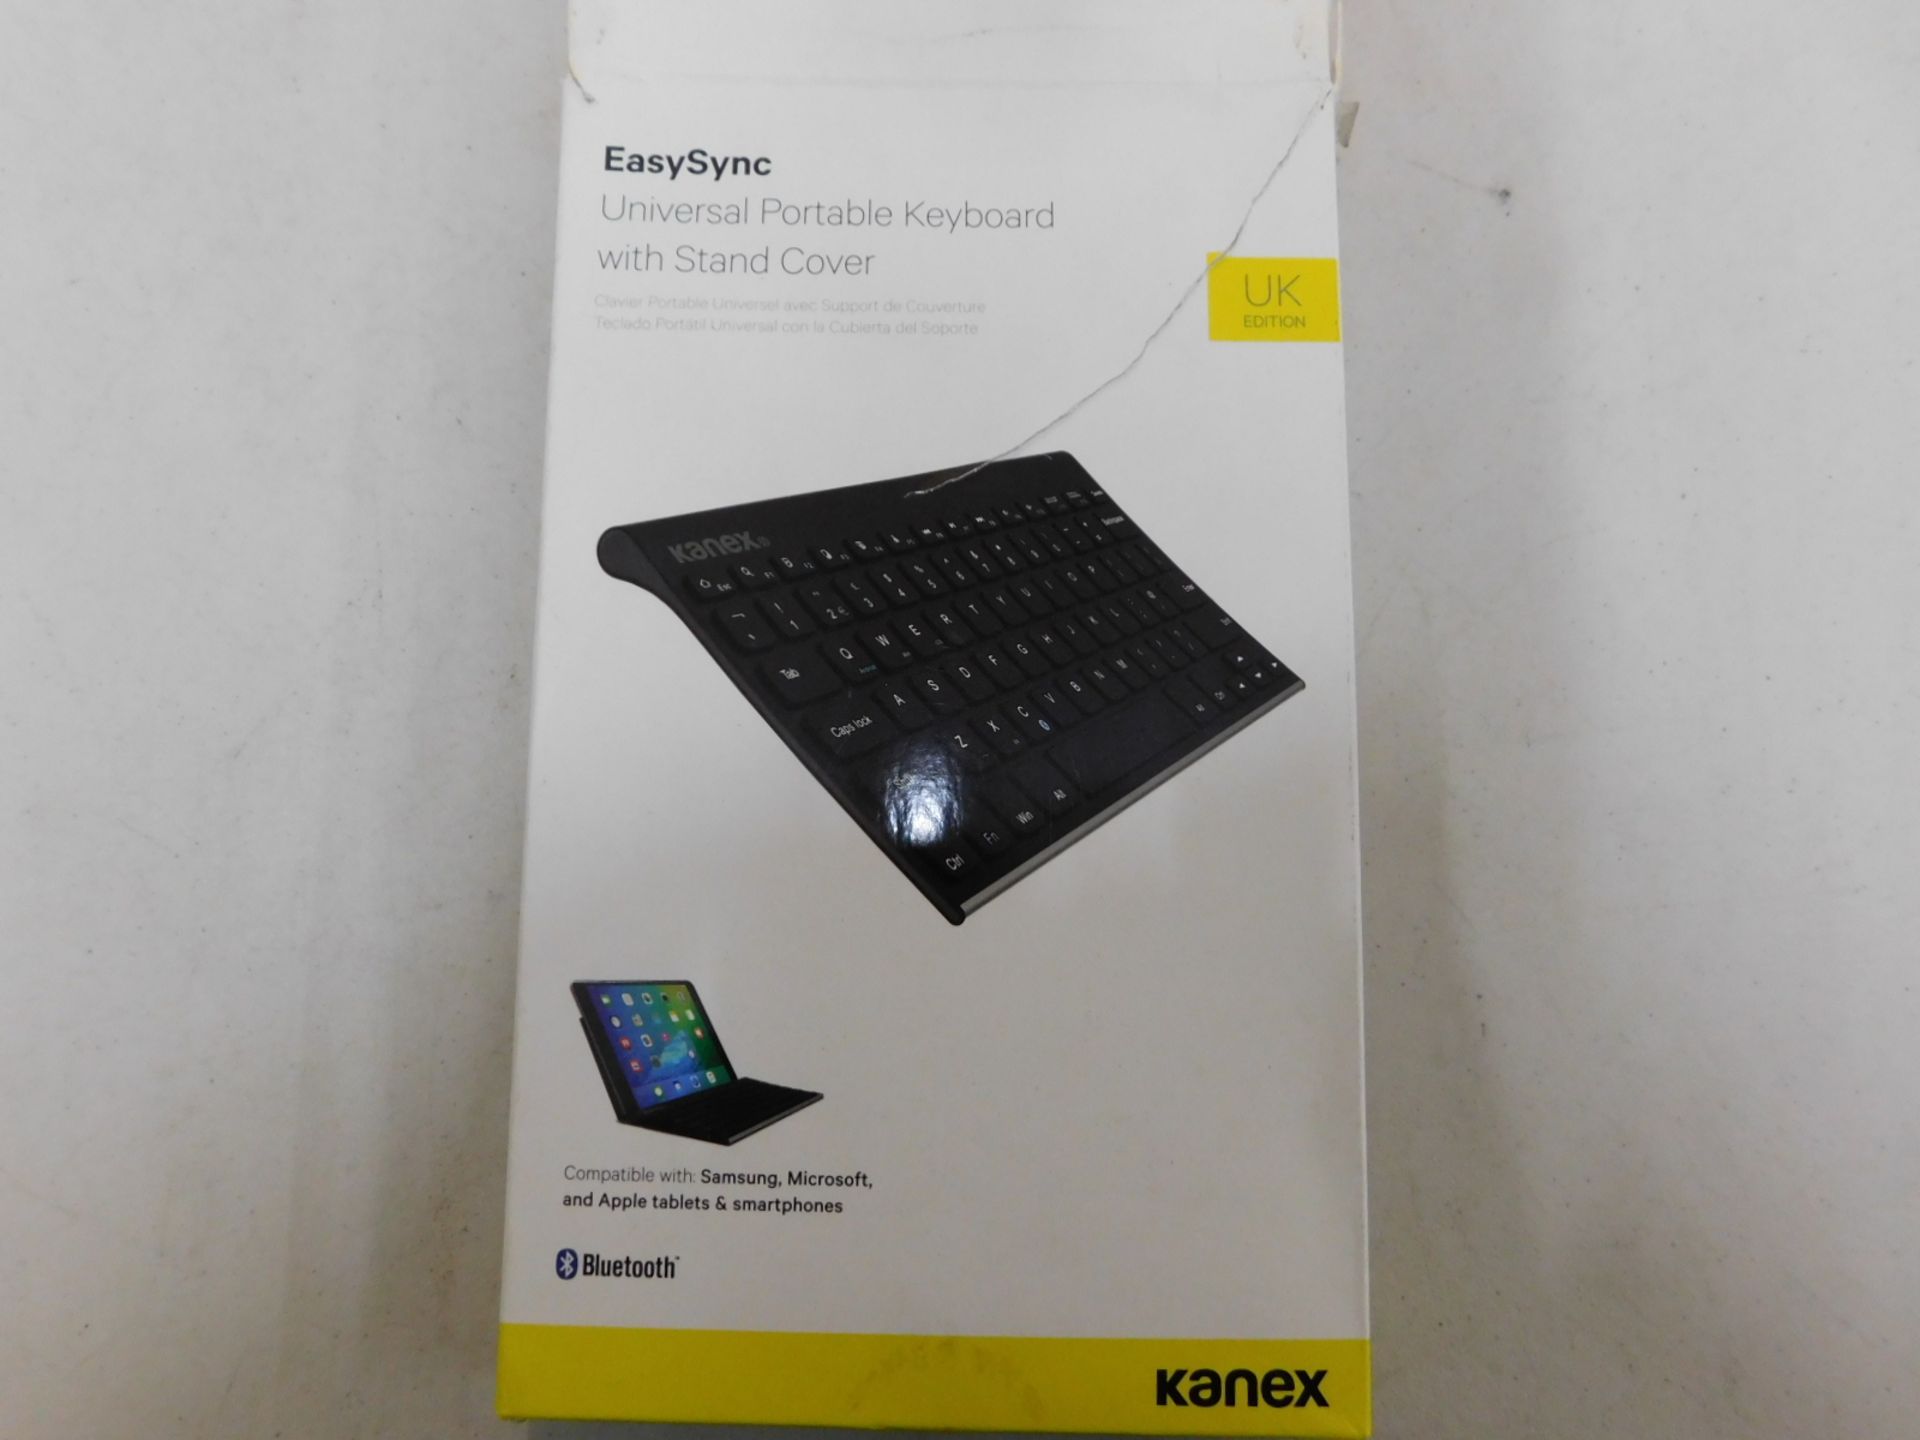 1 PACK OF KANEX EASY SYNC UNIVERSAL PORTABLE KEYBOARD WITH COVER RRP Â£49.99